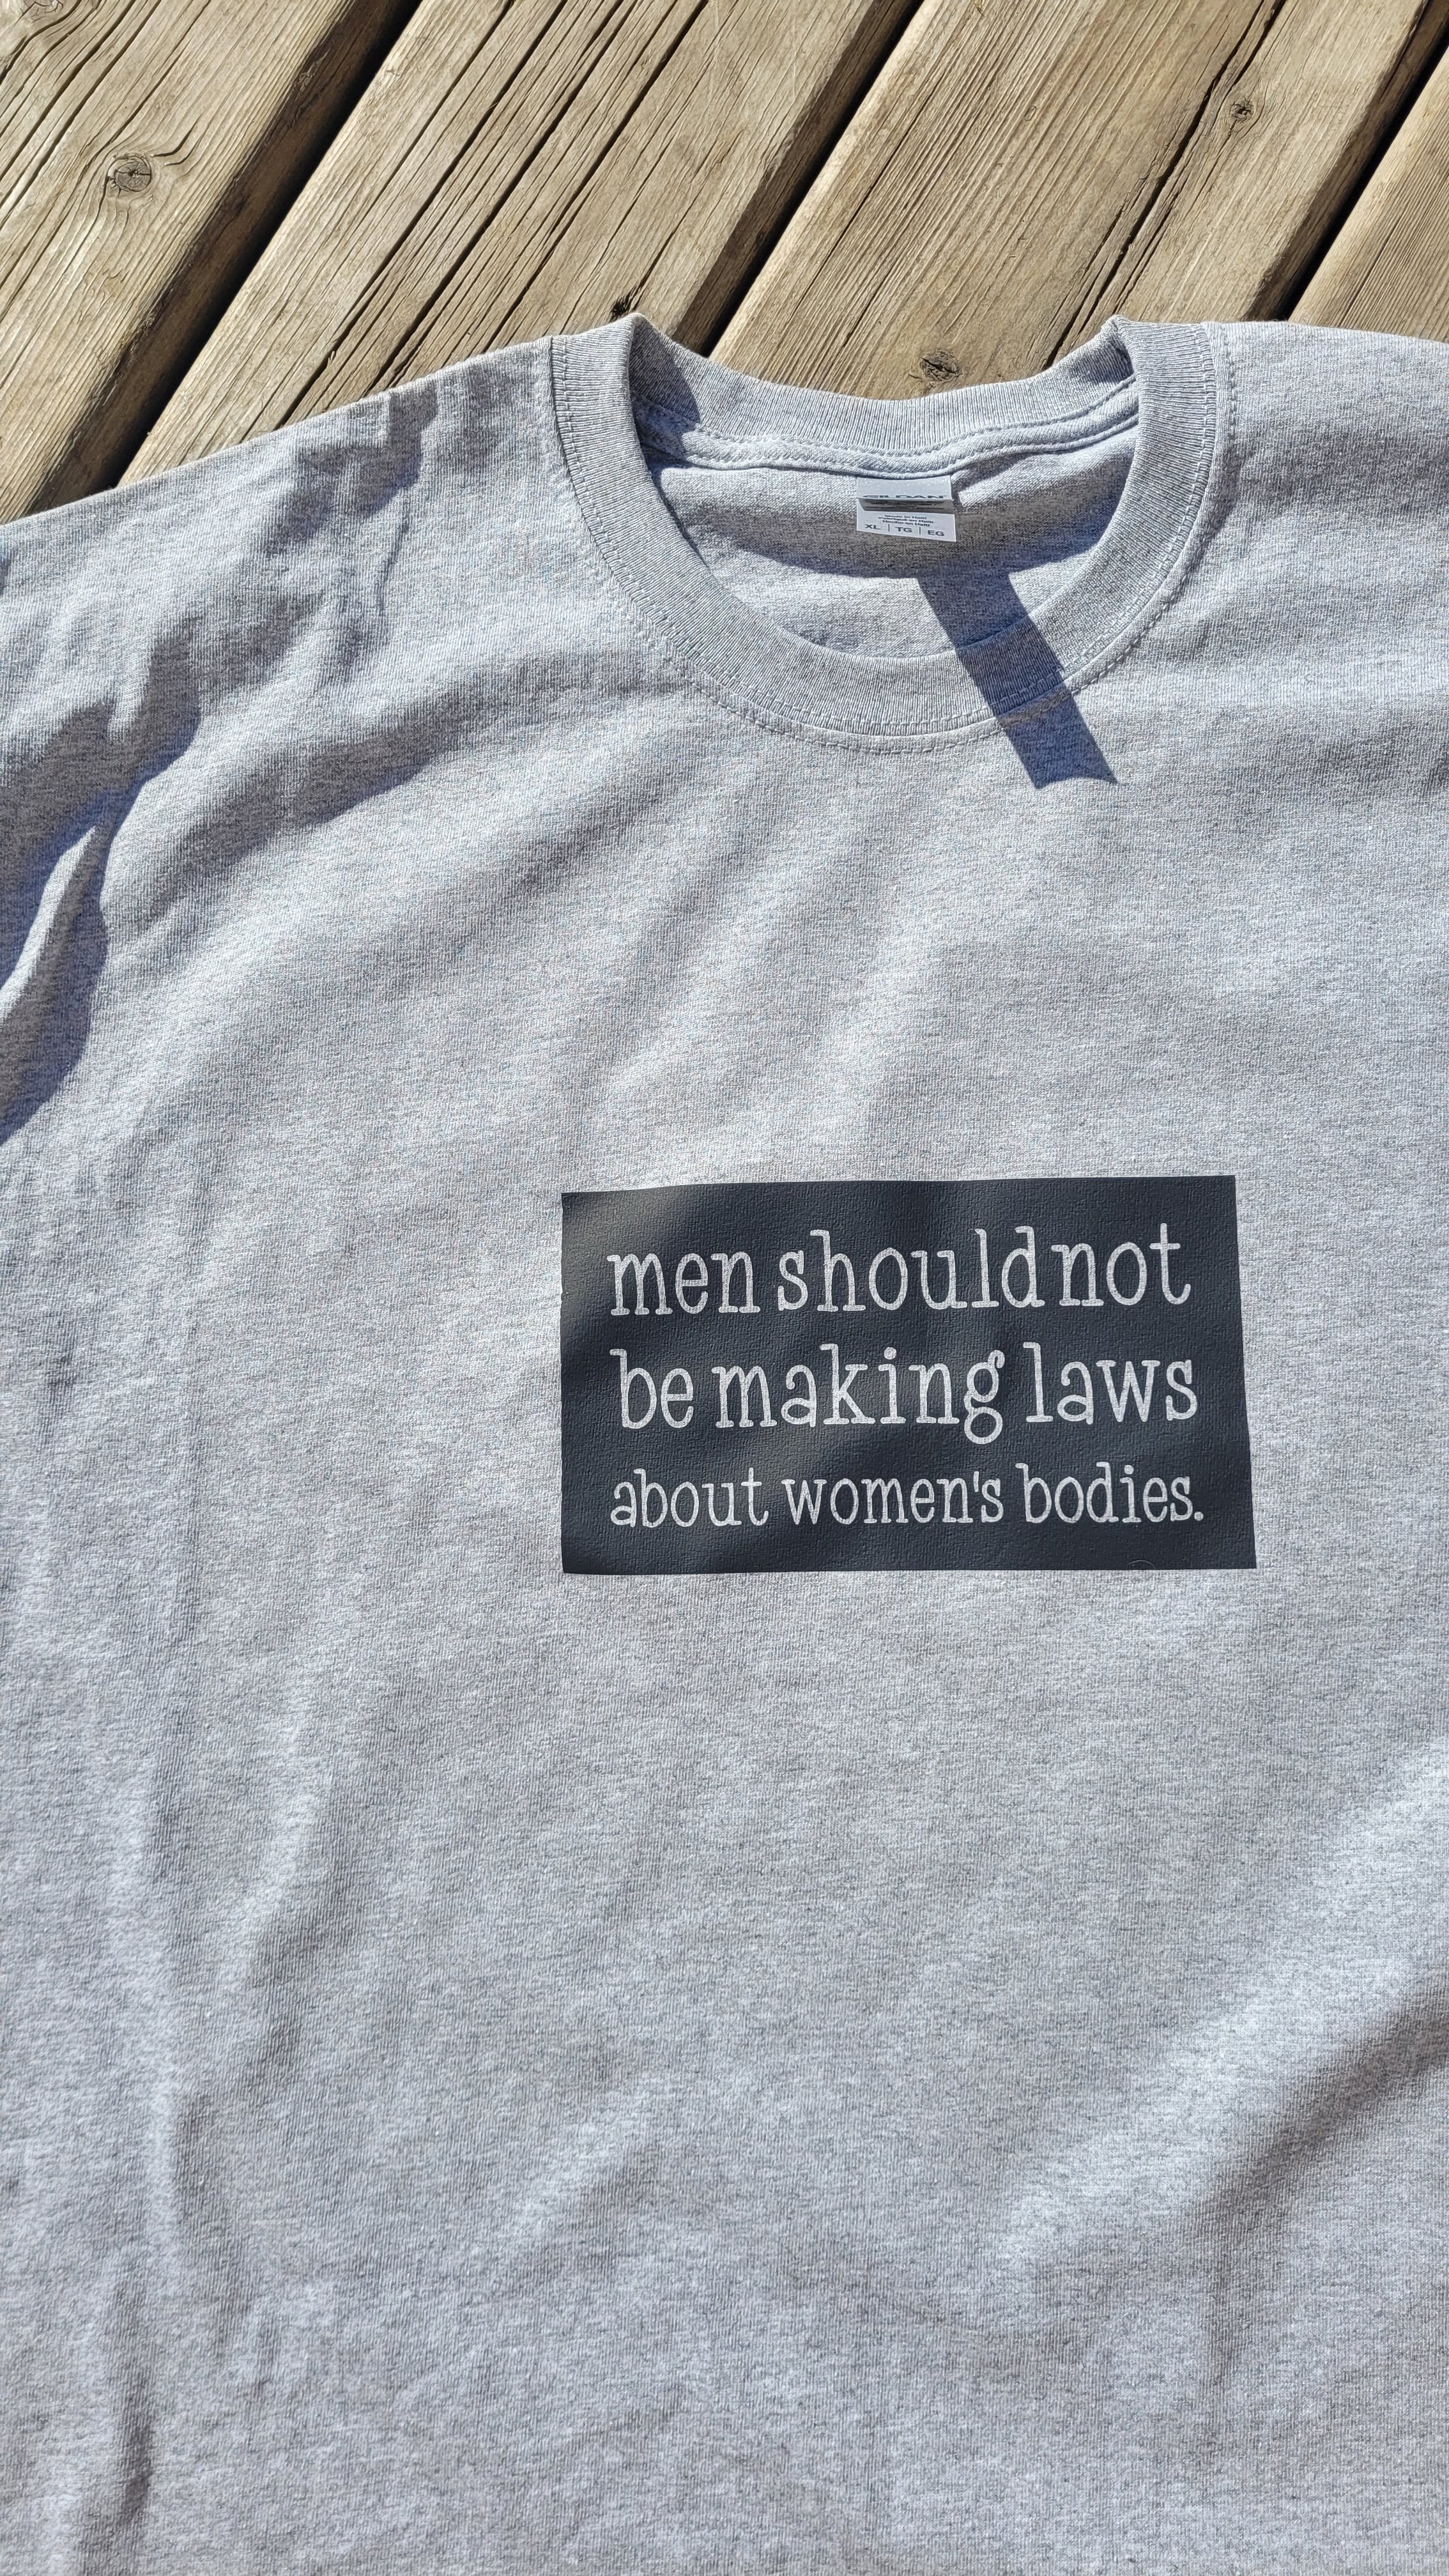 Men should not be makings laws | Women's Rights | T-shirt